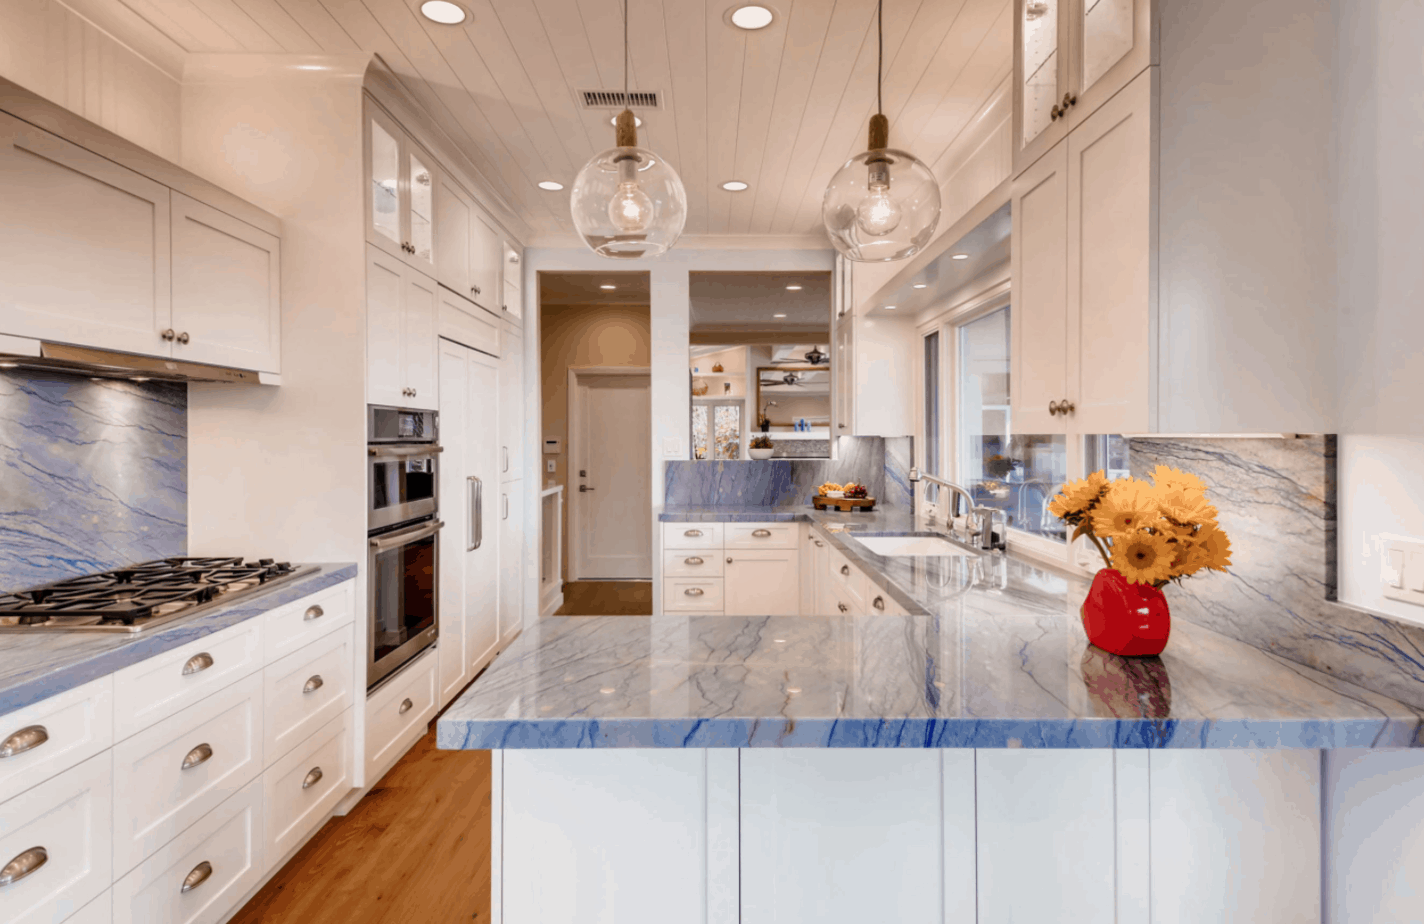 BEG The Best Kitchen Countertop Options for Your Lifestyle